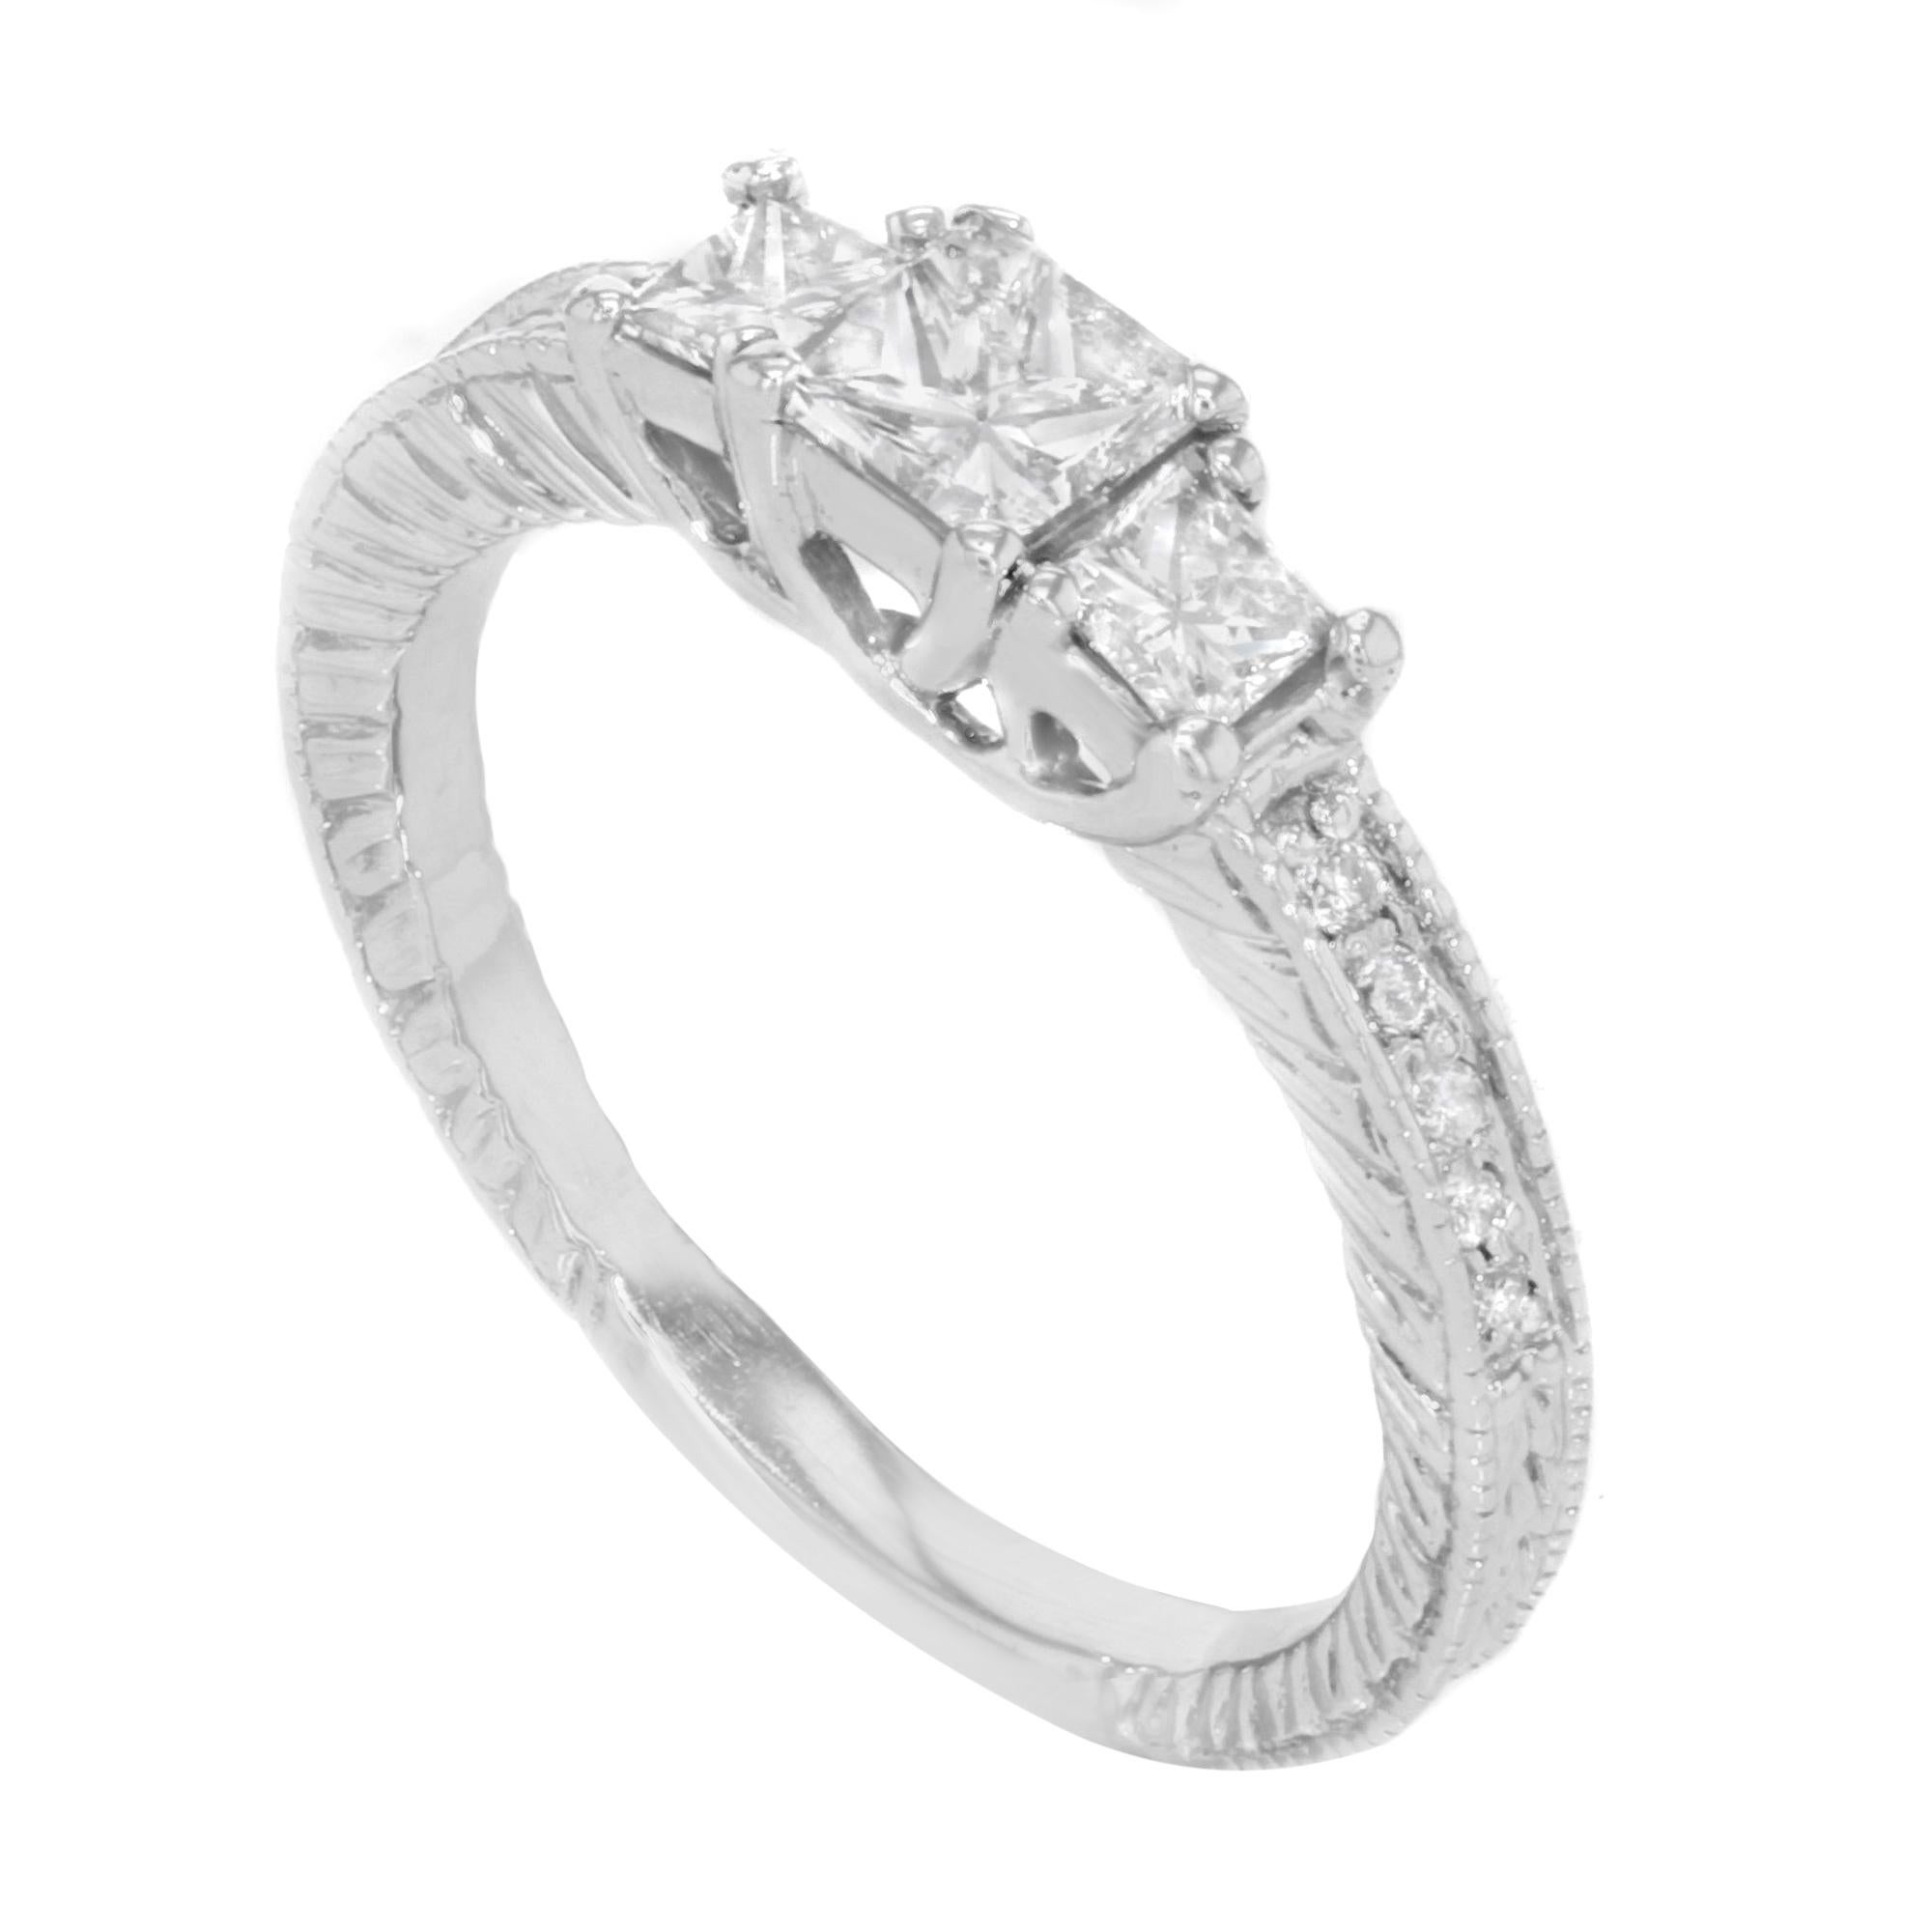 This beautiful ring is crafted in 14K white gold with approximately 1.00cttw of dazzling princess cut diamonds with tiny round cut diamonds. The color of stones is G-H and clarity VS-SI. The center stone weighs 0.40ct. Ring size: 7. Total weight: